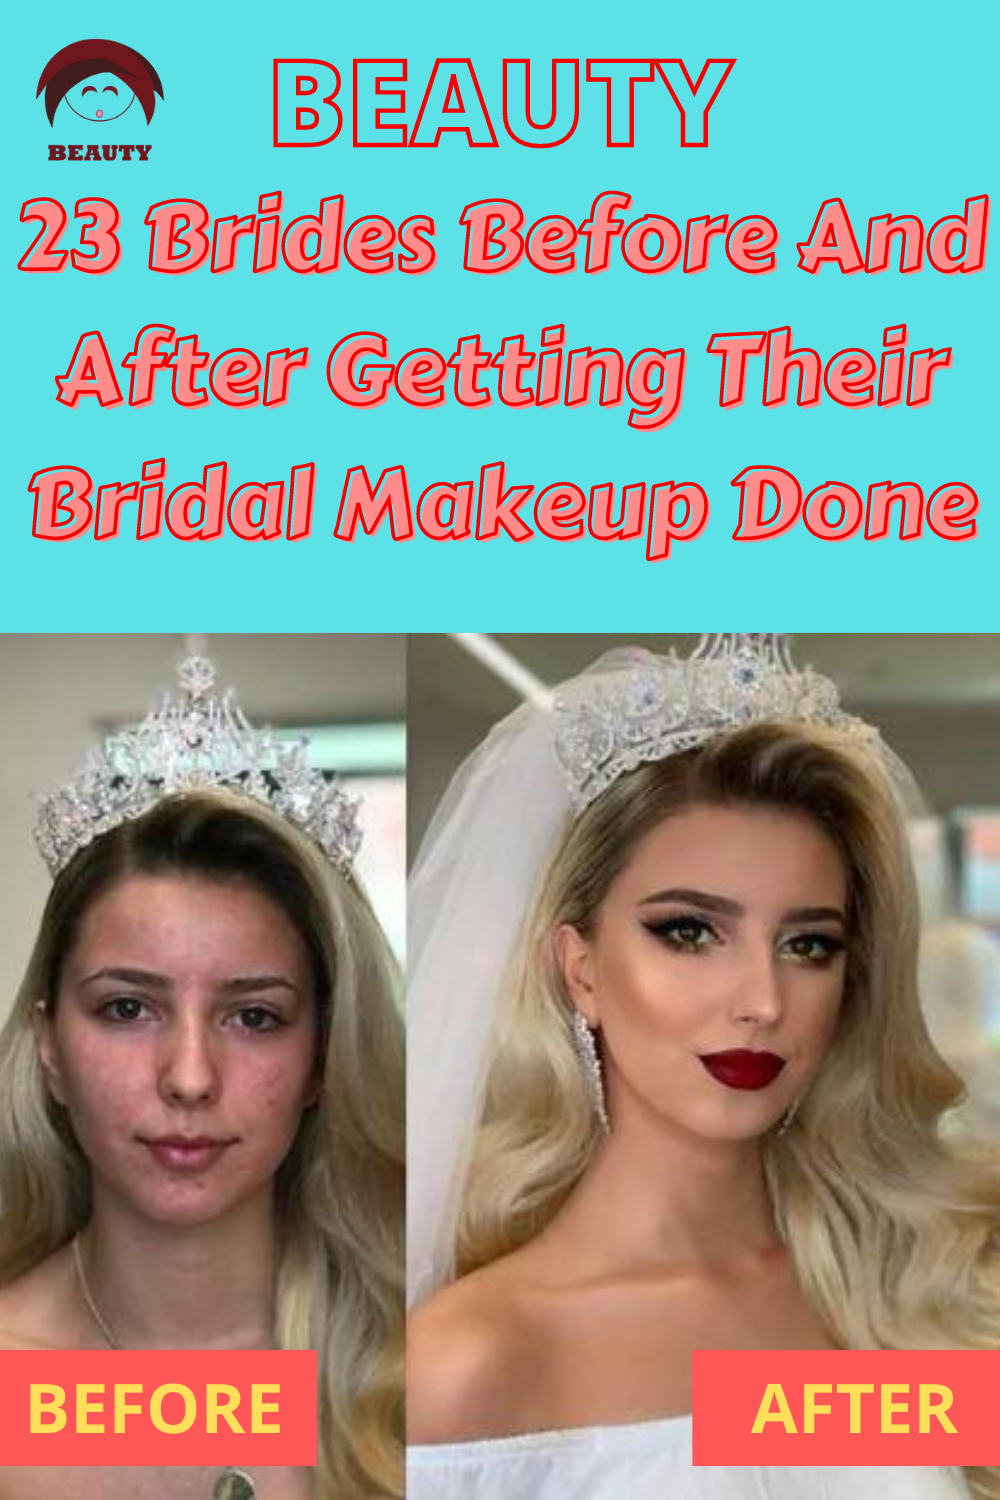 23 Brides Before And After Getting Their Bridal Makeup Done -   13 makeup DIY hacks ideas